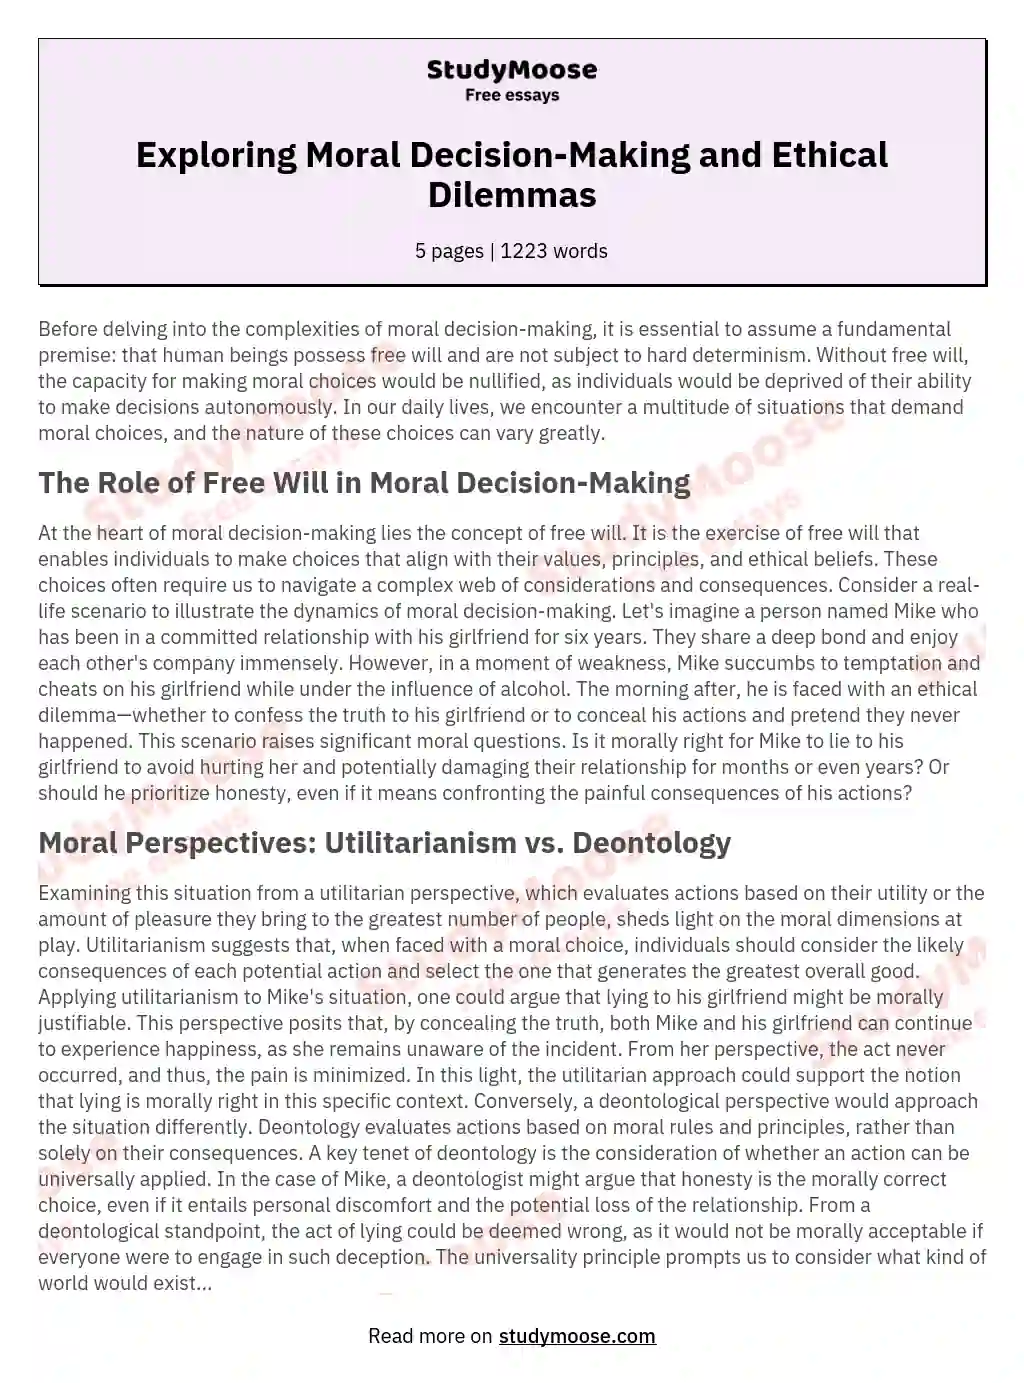 Exploring Moral Decision-Making and Ethical Dilemmas essay